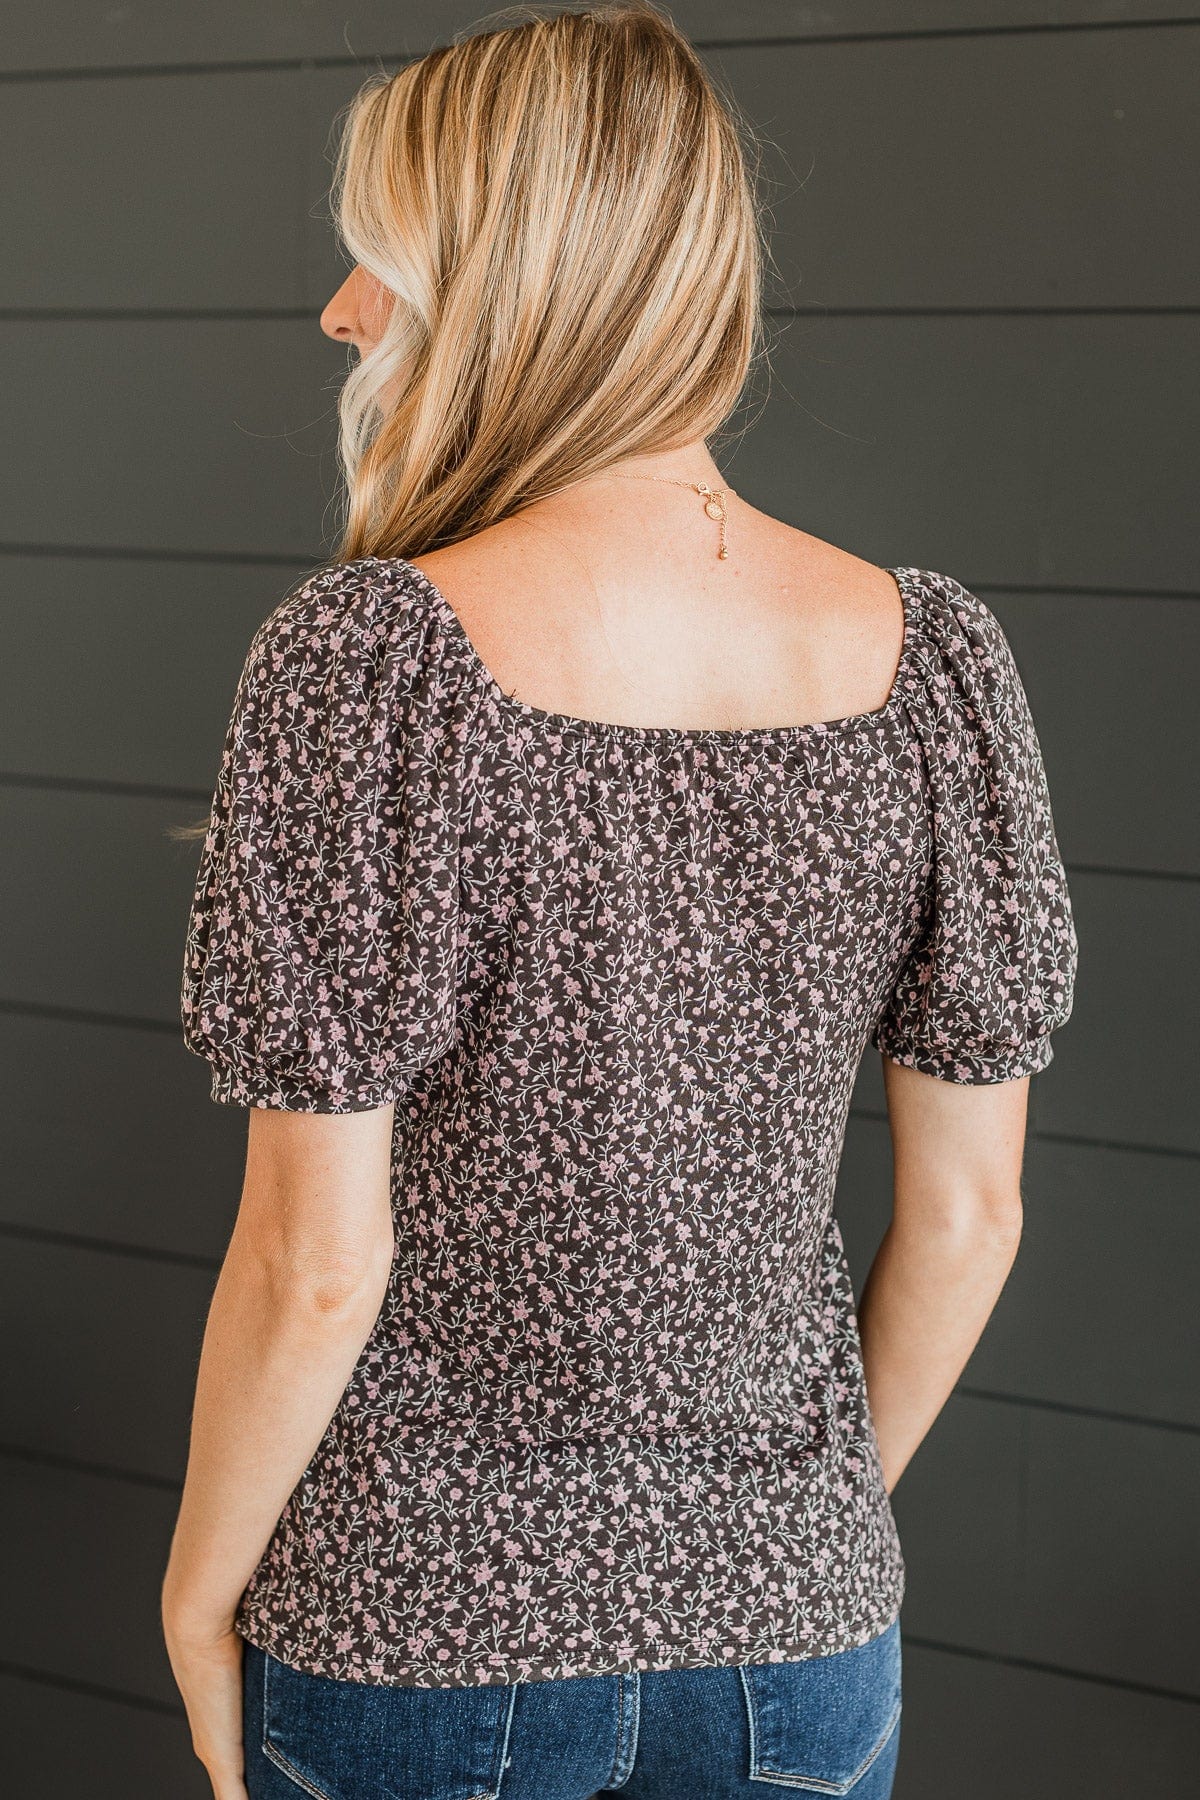 Caught Feelings Floral Top- Charcoal